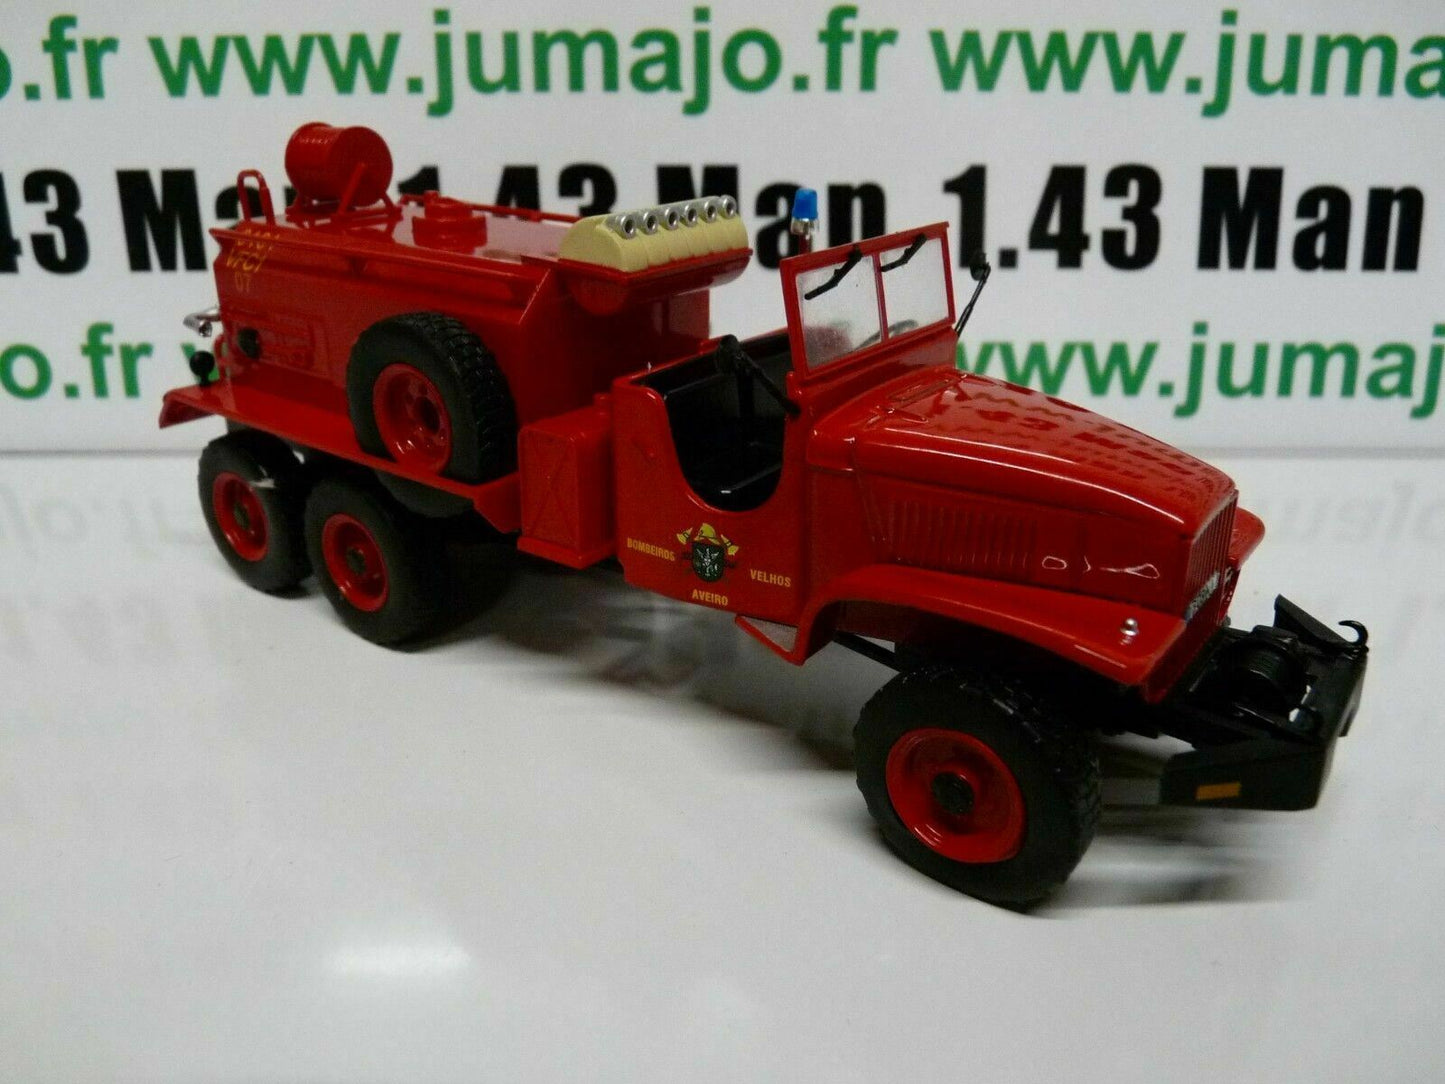 CP15 POMPIERS 1/43 altaya IXO GMC CCKW 353 camion citerne feux forêt Portugal